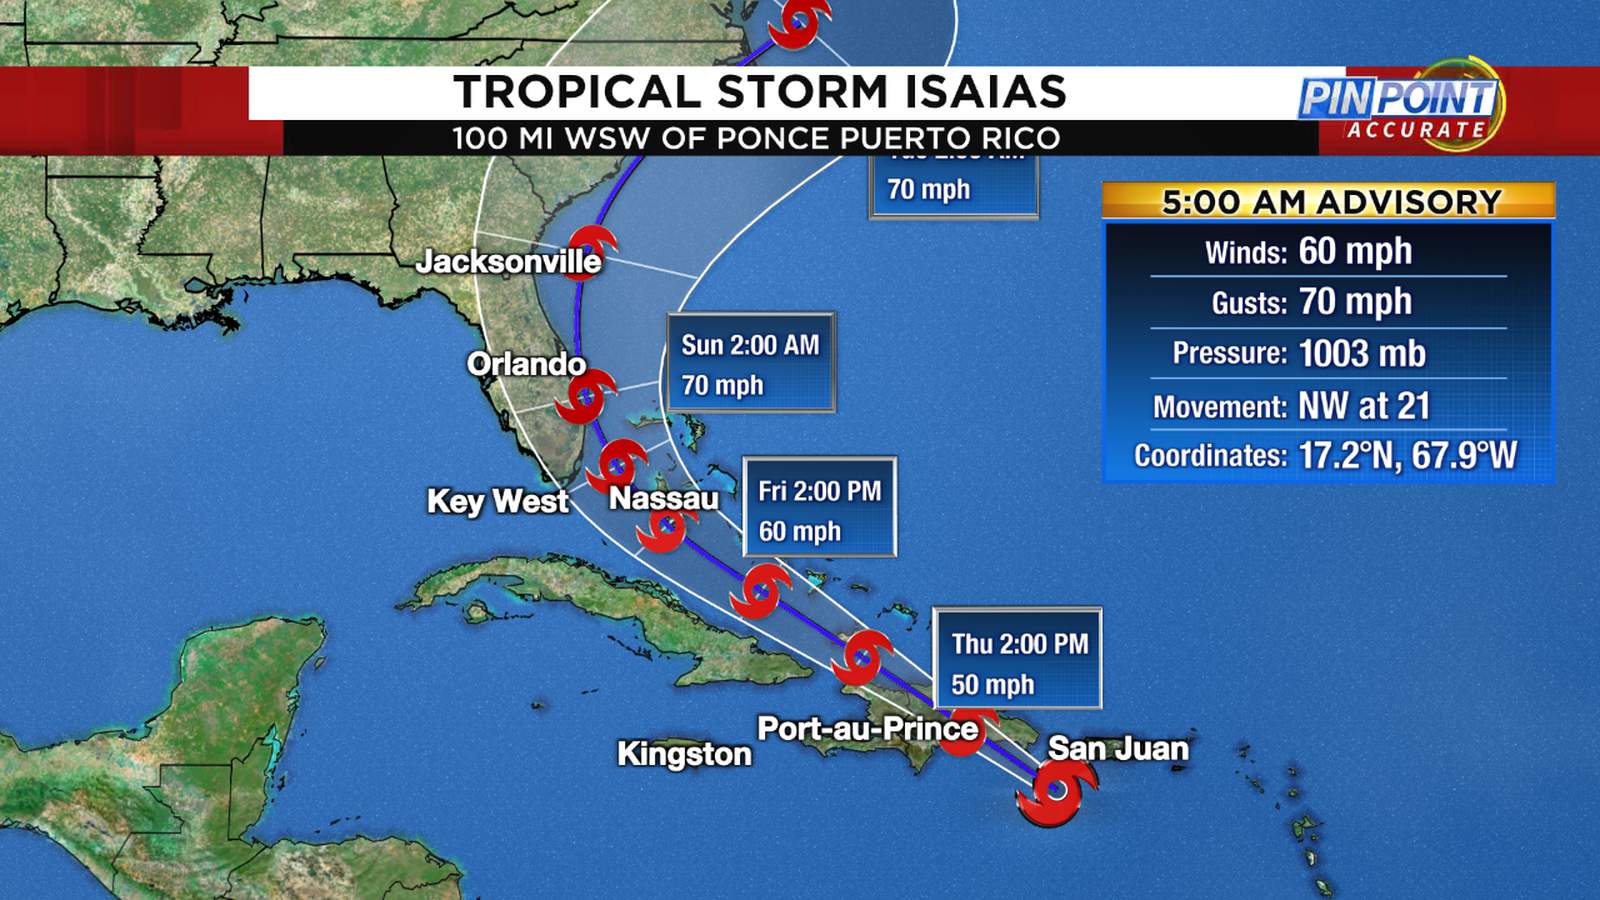 WATCH LIVE: Forecast cone, computer models and updates for Tropical Storm Isaias